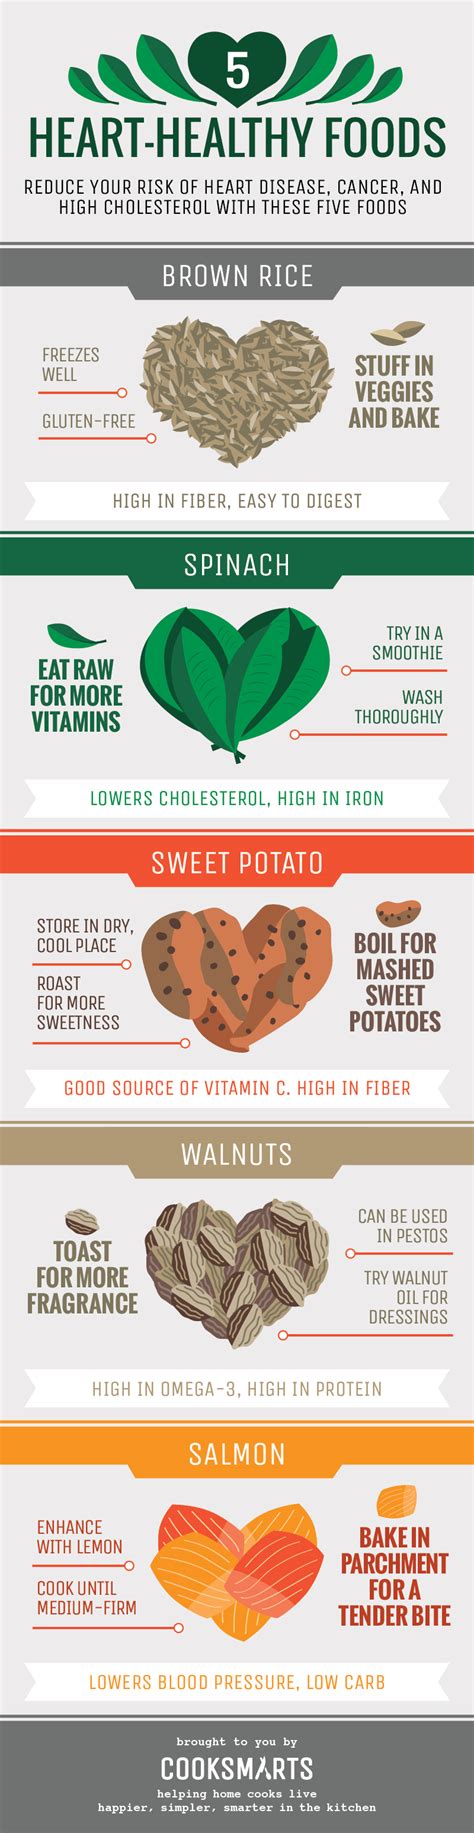 Treat Yourself Right with 5 Heart-Healthy Foods - Cook Smarts